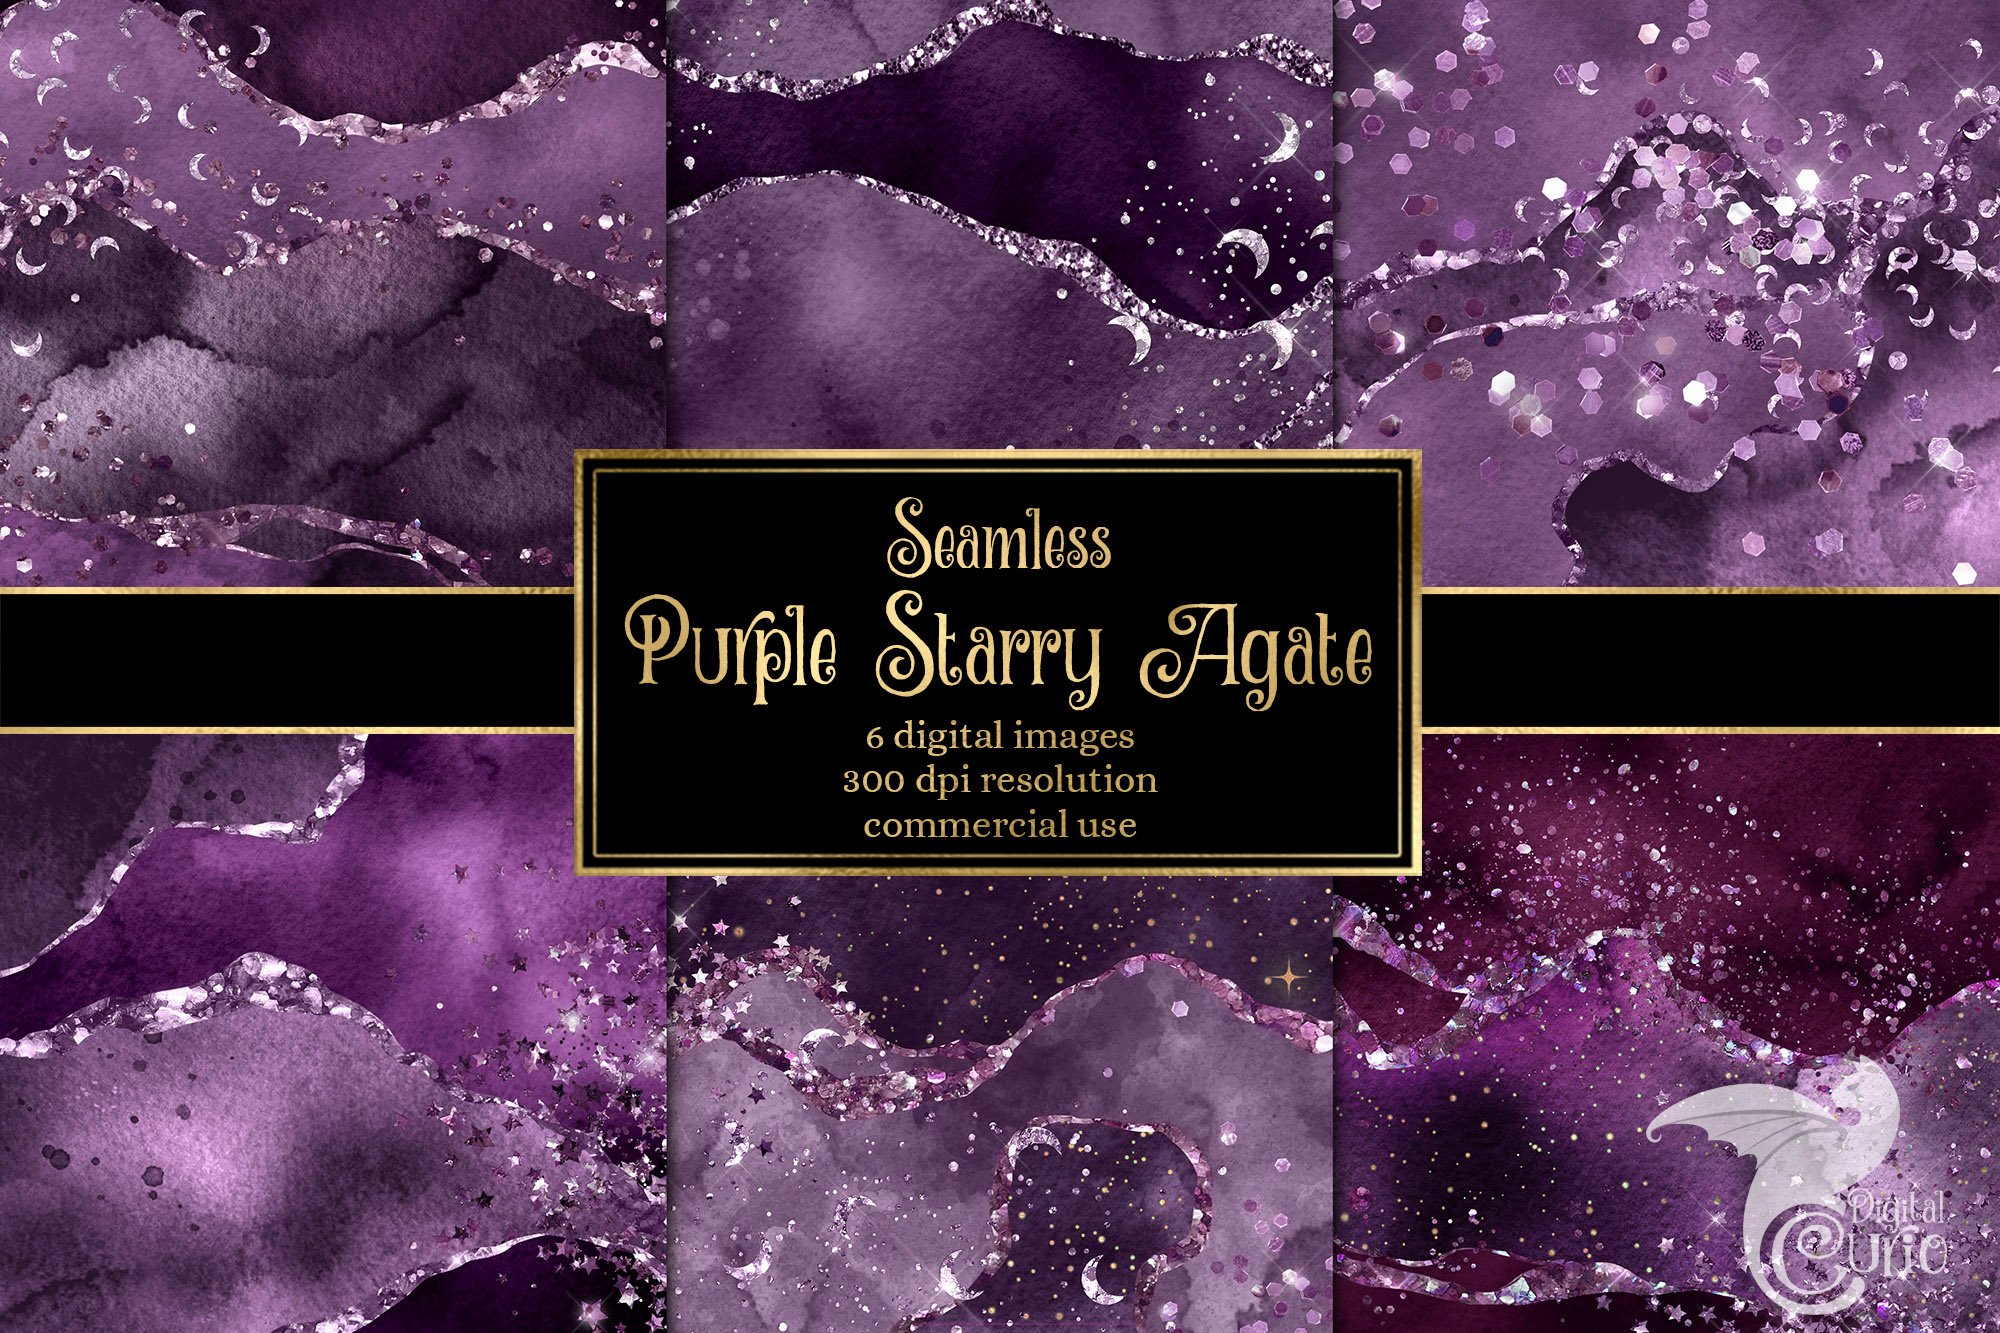 Purple Starry Agate Textures cover image.